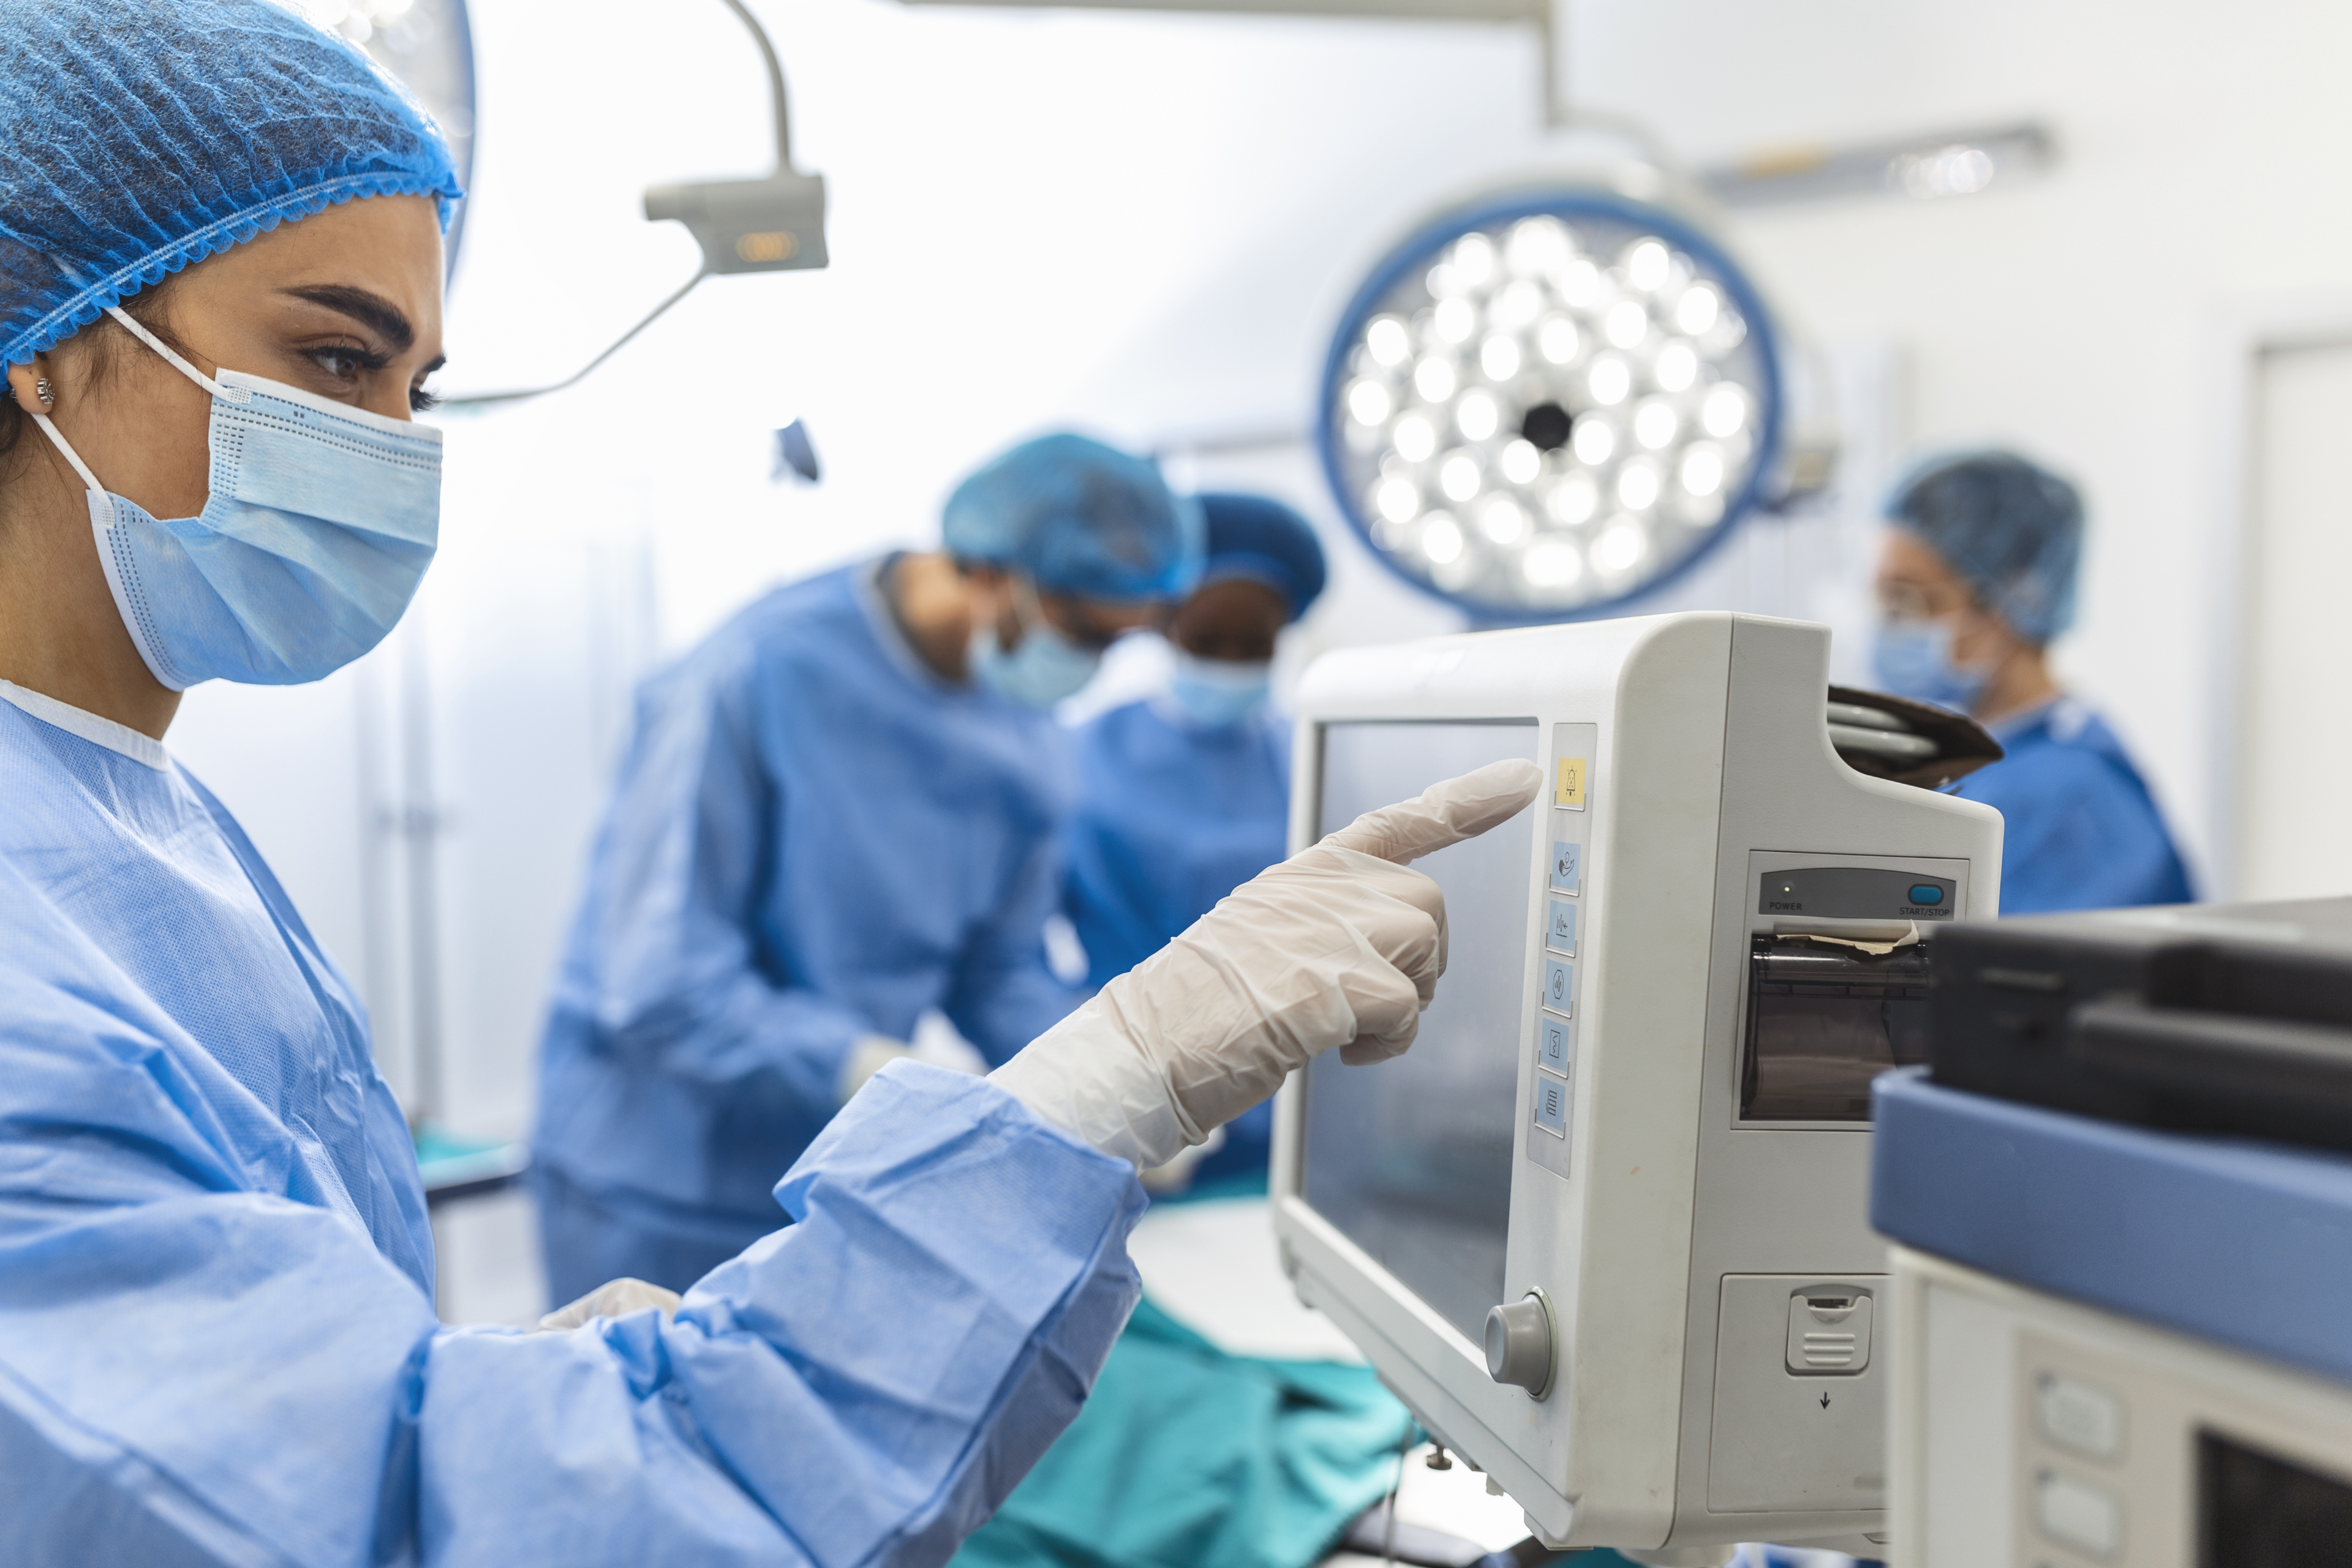 Diverse Team Of Professional Surgeons Performing Invasive Surgery On A Patient In The Hospital Operating Room. Nurse Hands Out Instruments To Surgeon, Anesthesiologist Monitors Vitals.